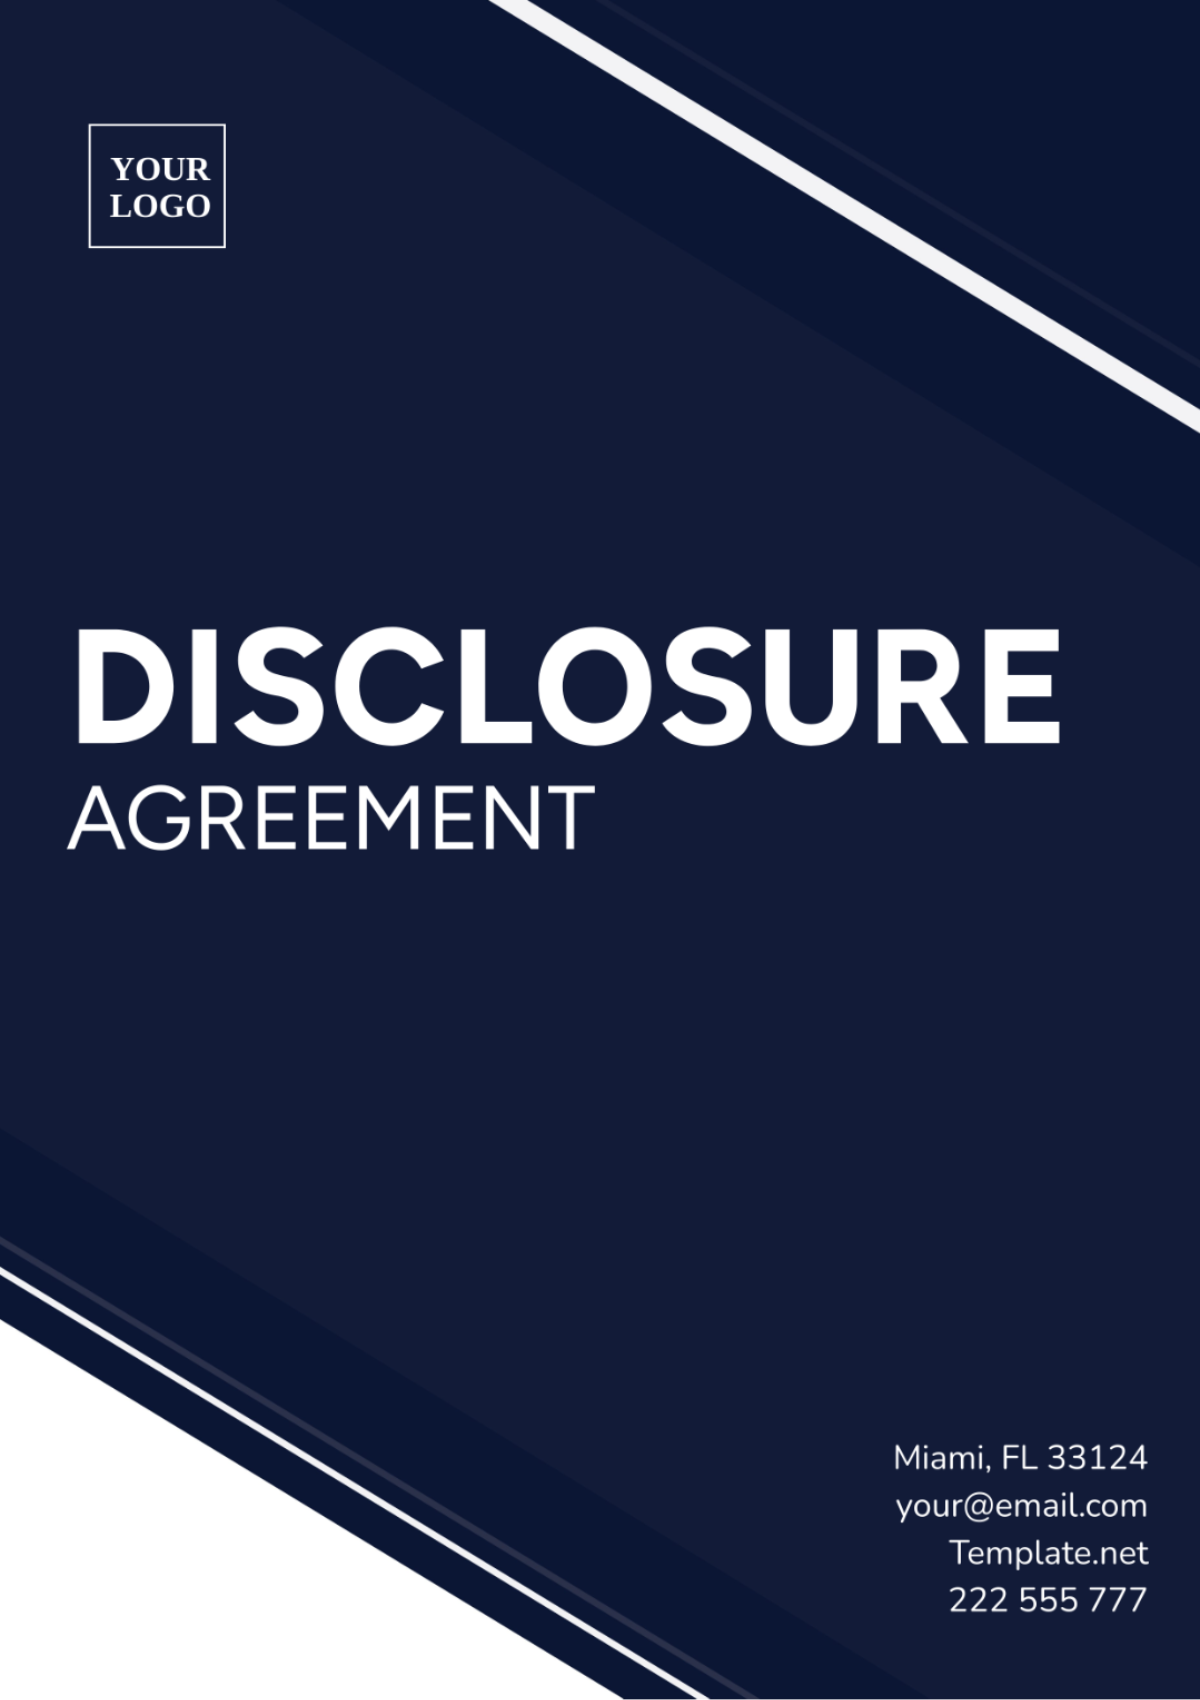 Disclosure Agreement Template